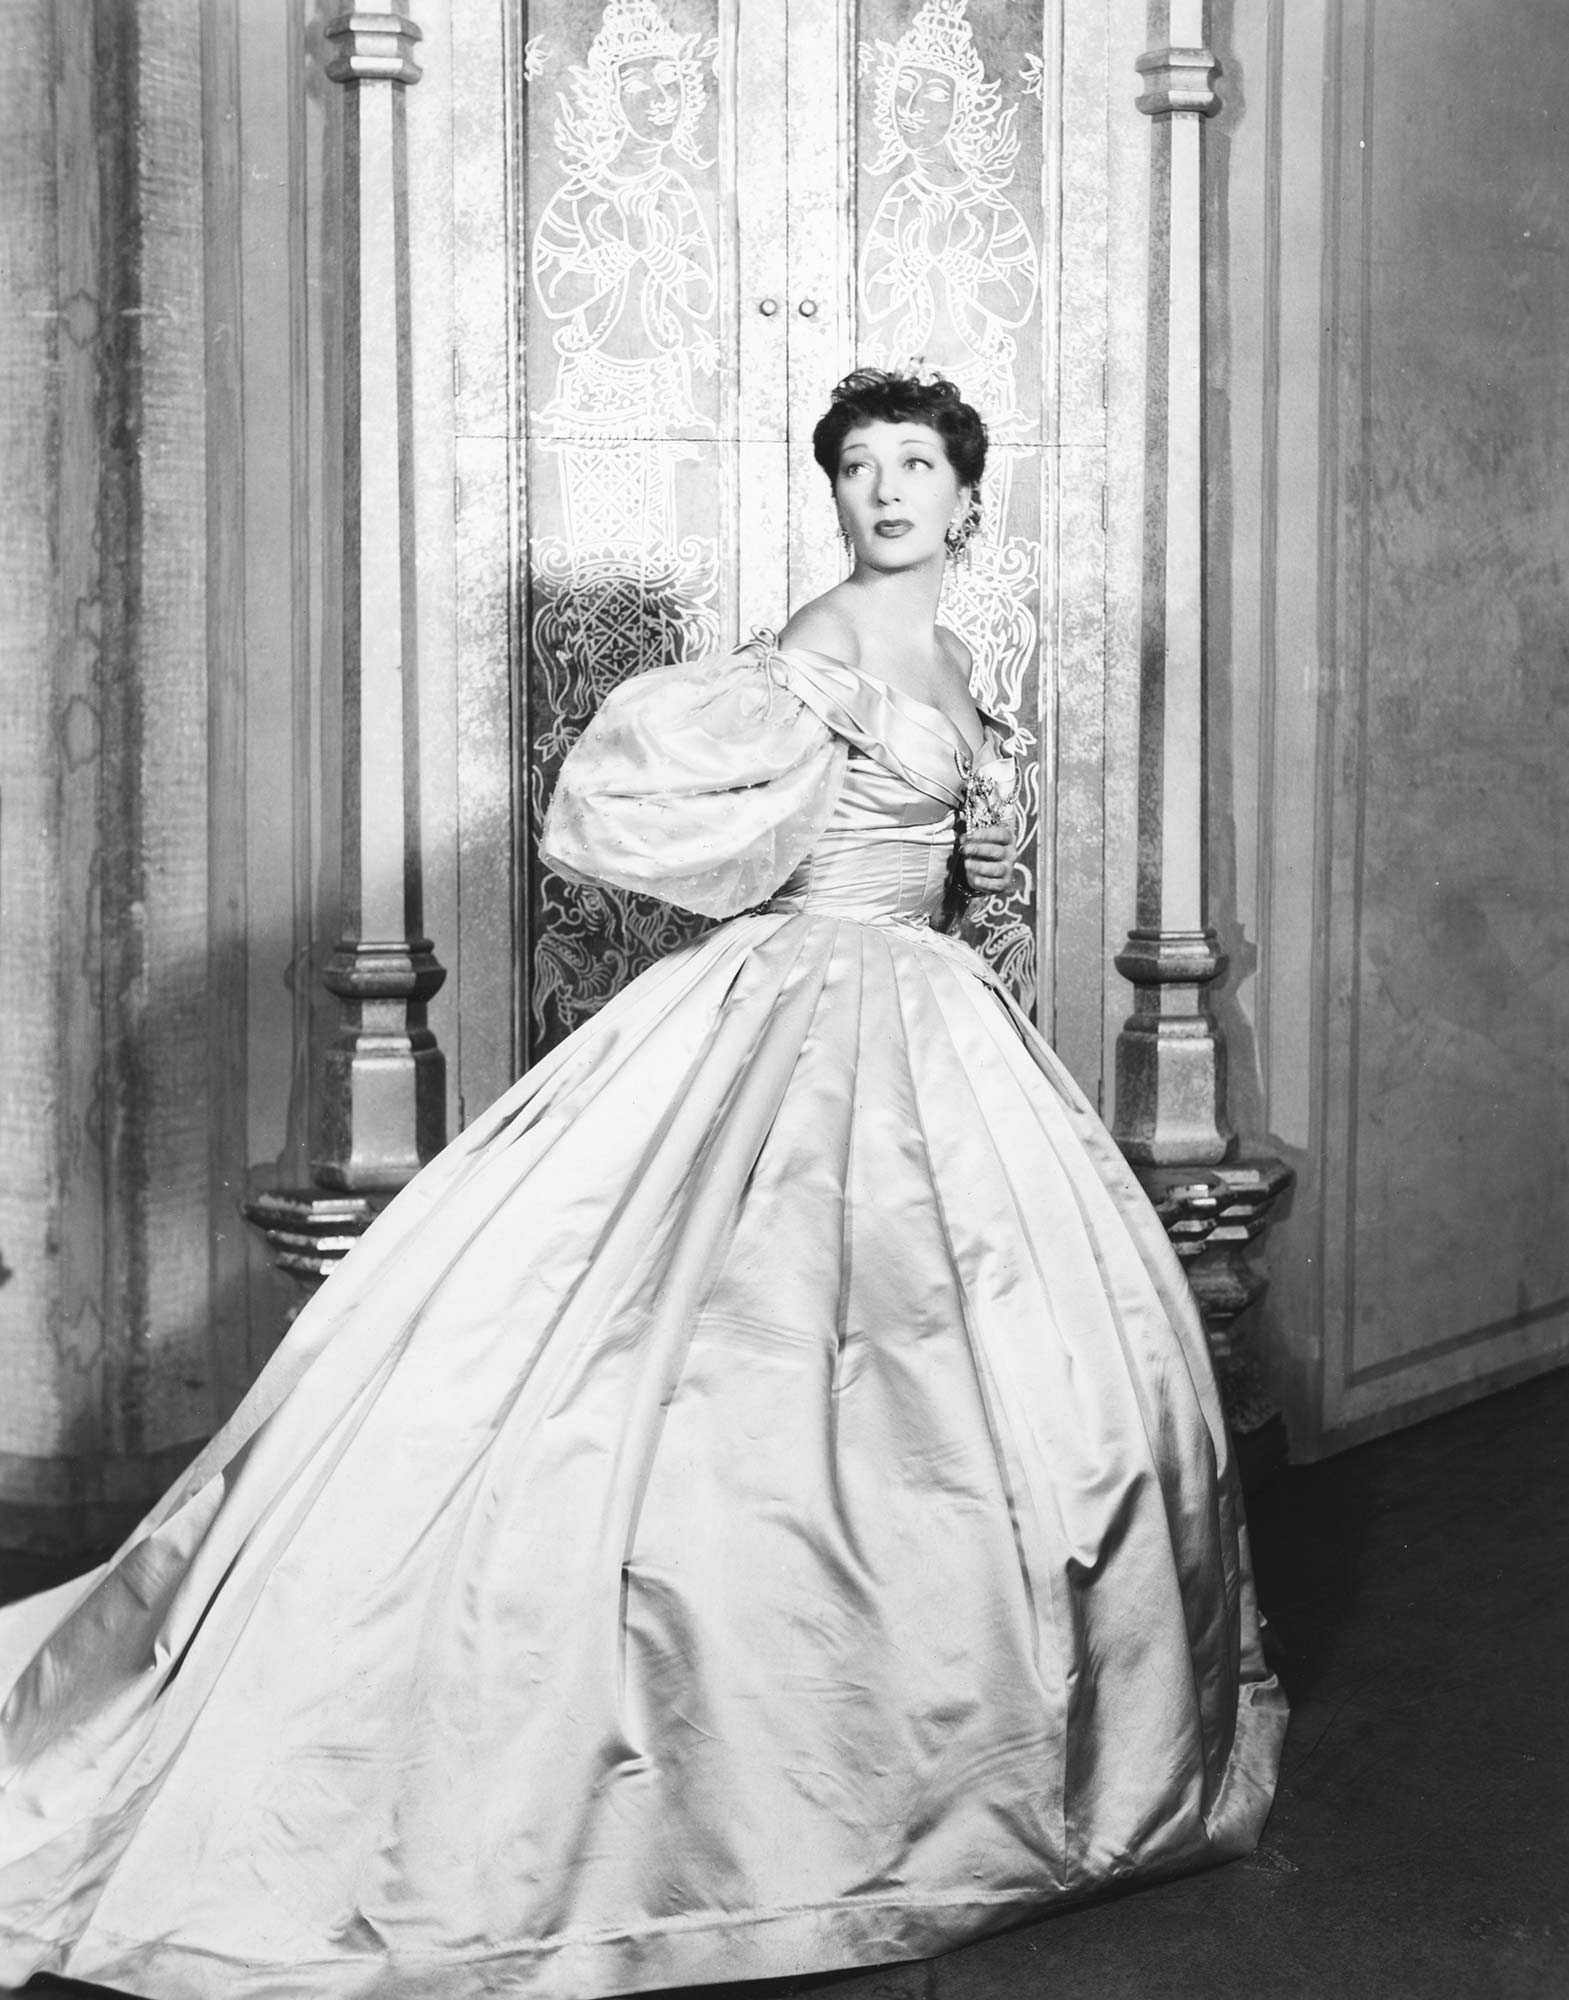 A photo from the 1951 Broadway production of The King and I.